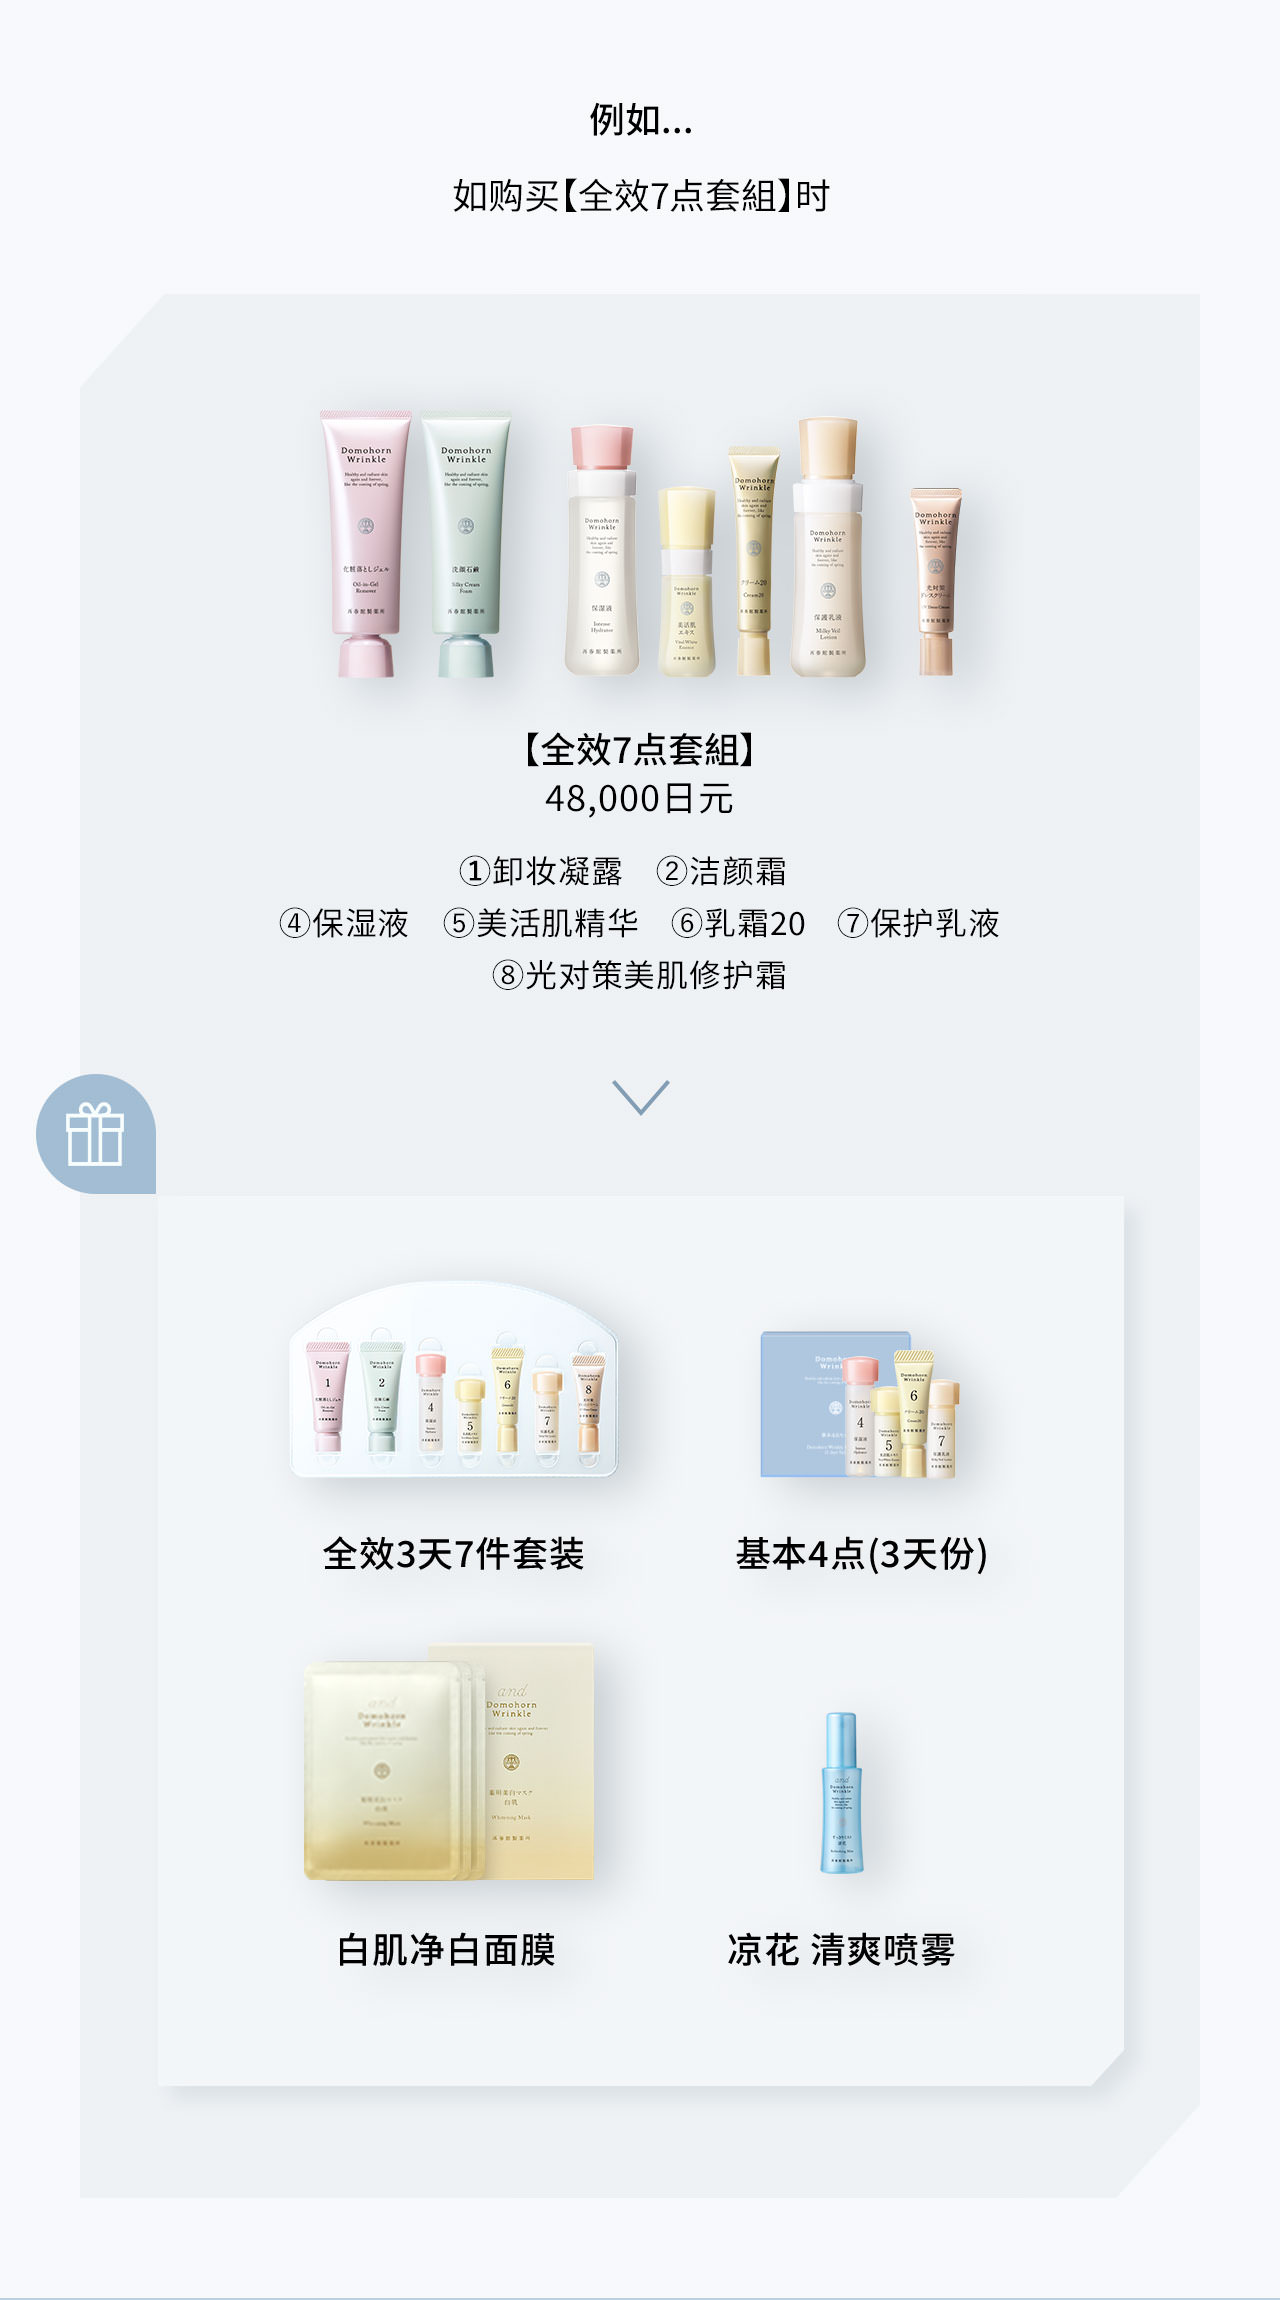 If you... purchase "Total 7" set. You get Full Series 3-day Set, Essential 4 (For 3 days), Whitening Mask and Refreshing Mist.